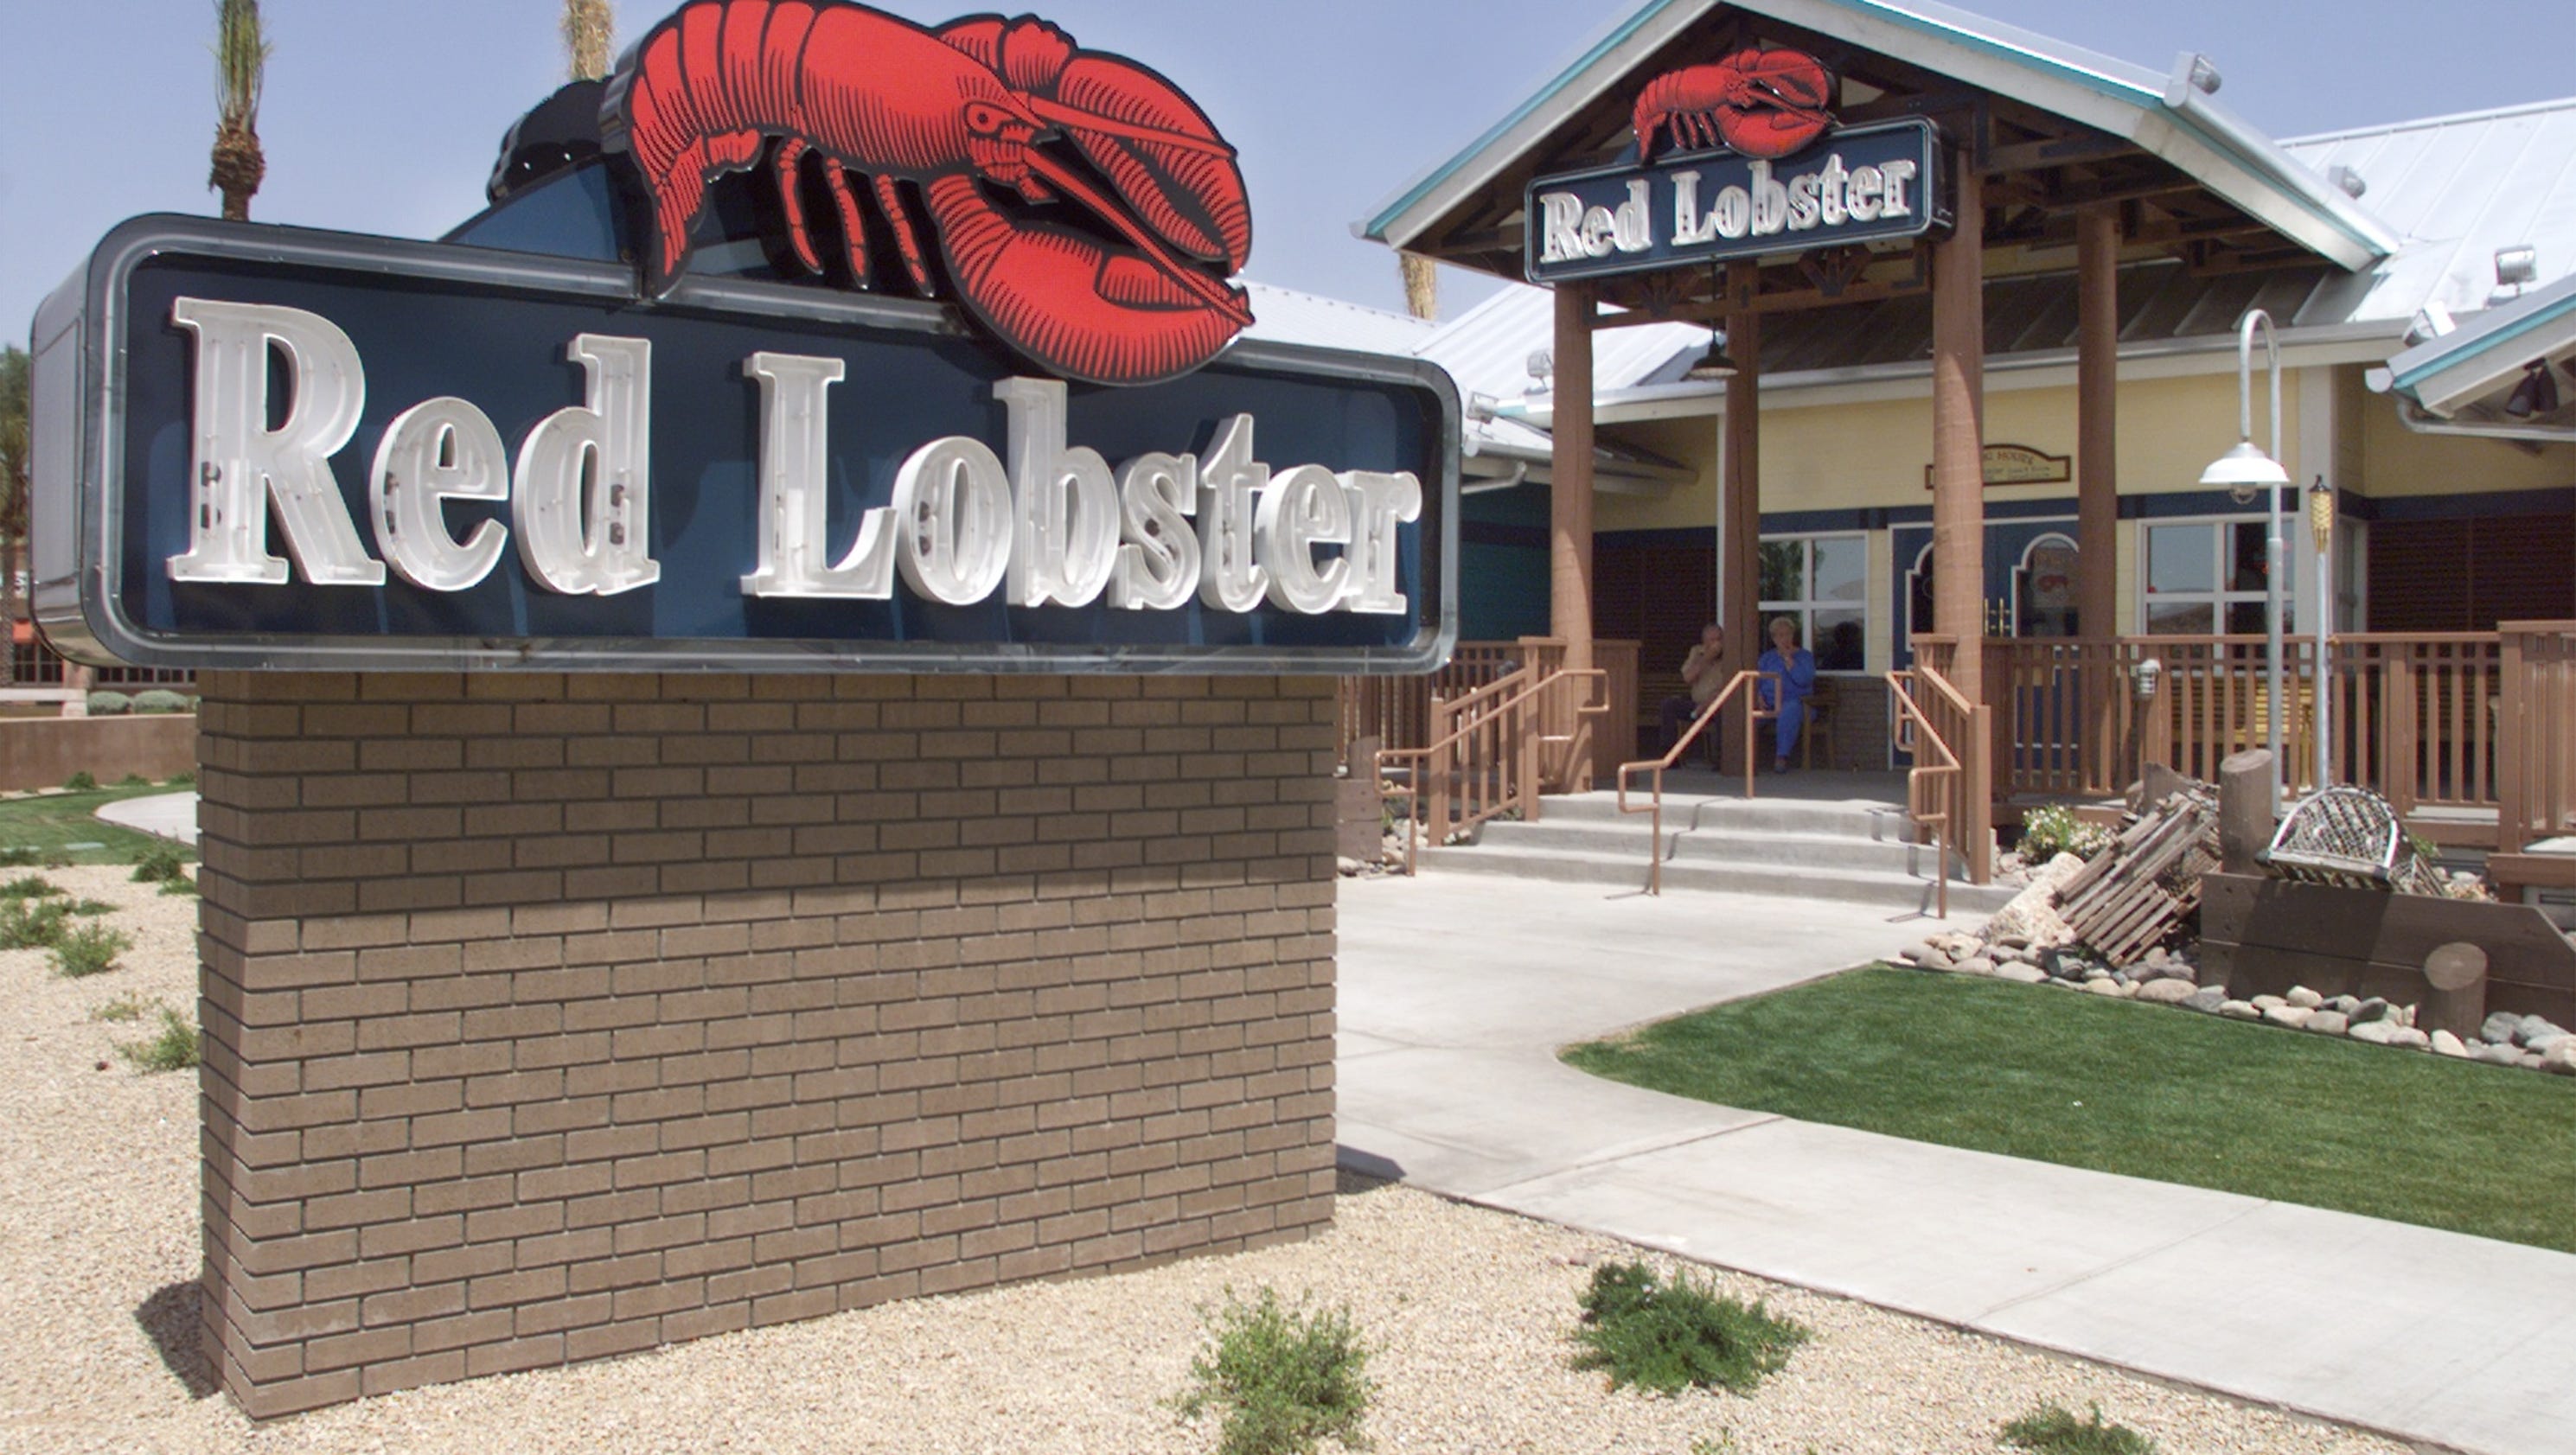 E. coli reported at Red Lobster, Panera and Texas Roadhouse in outbreak tied to Yuma lettuce